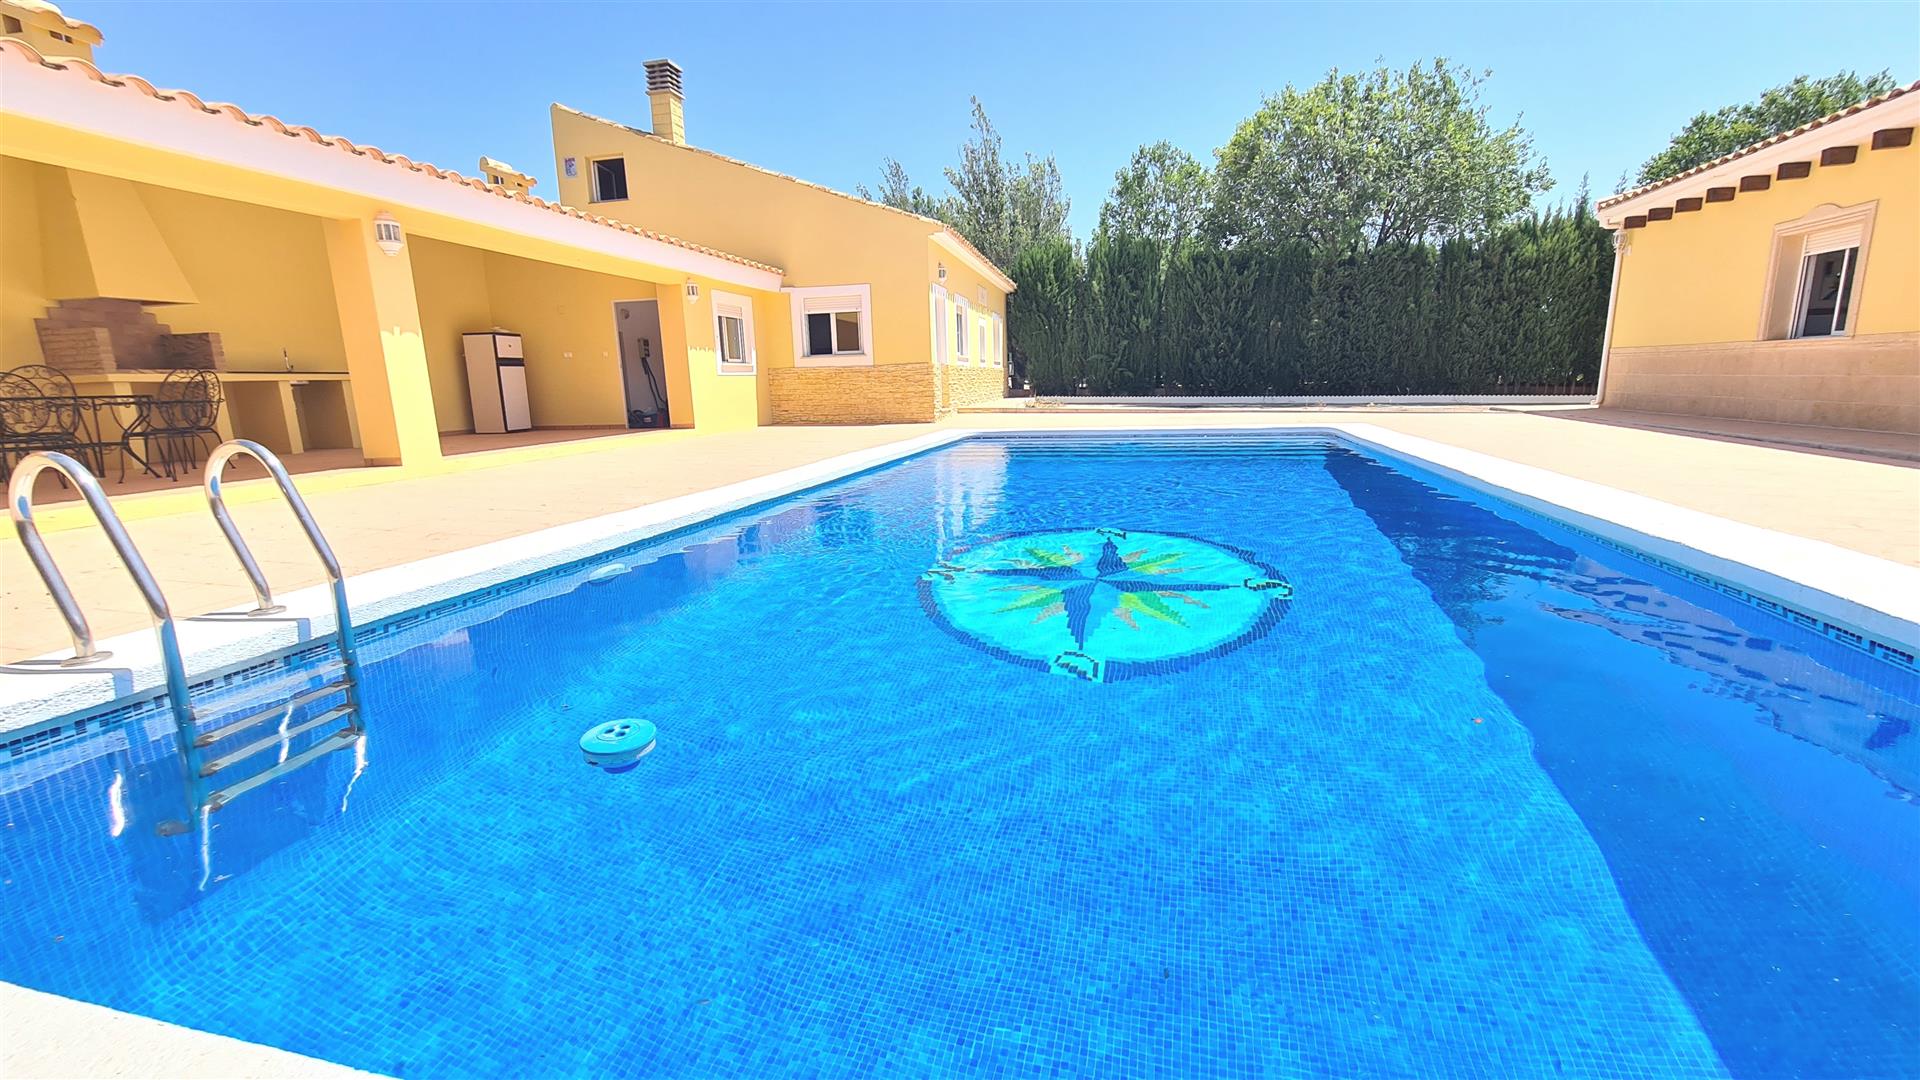 Amazing country house with guest house in costa blanca